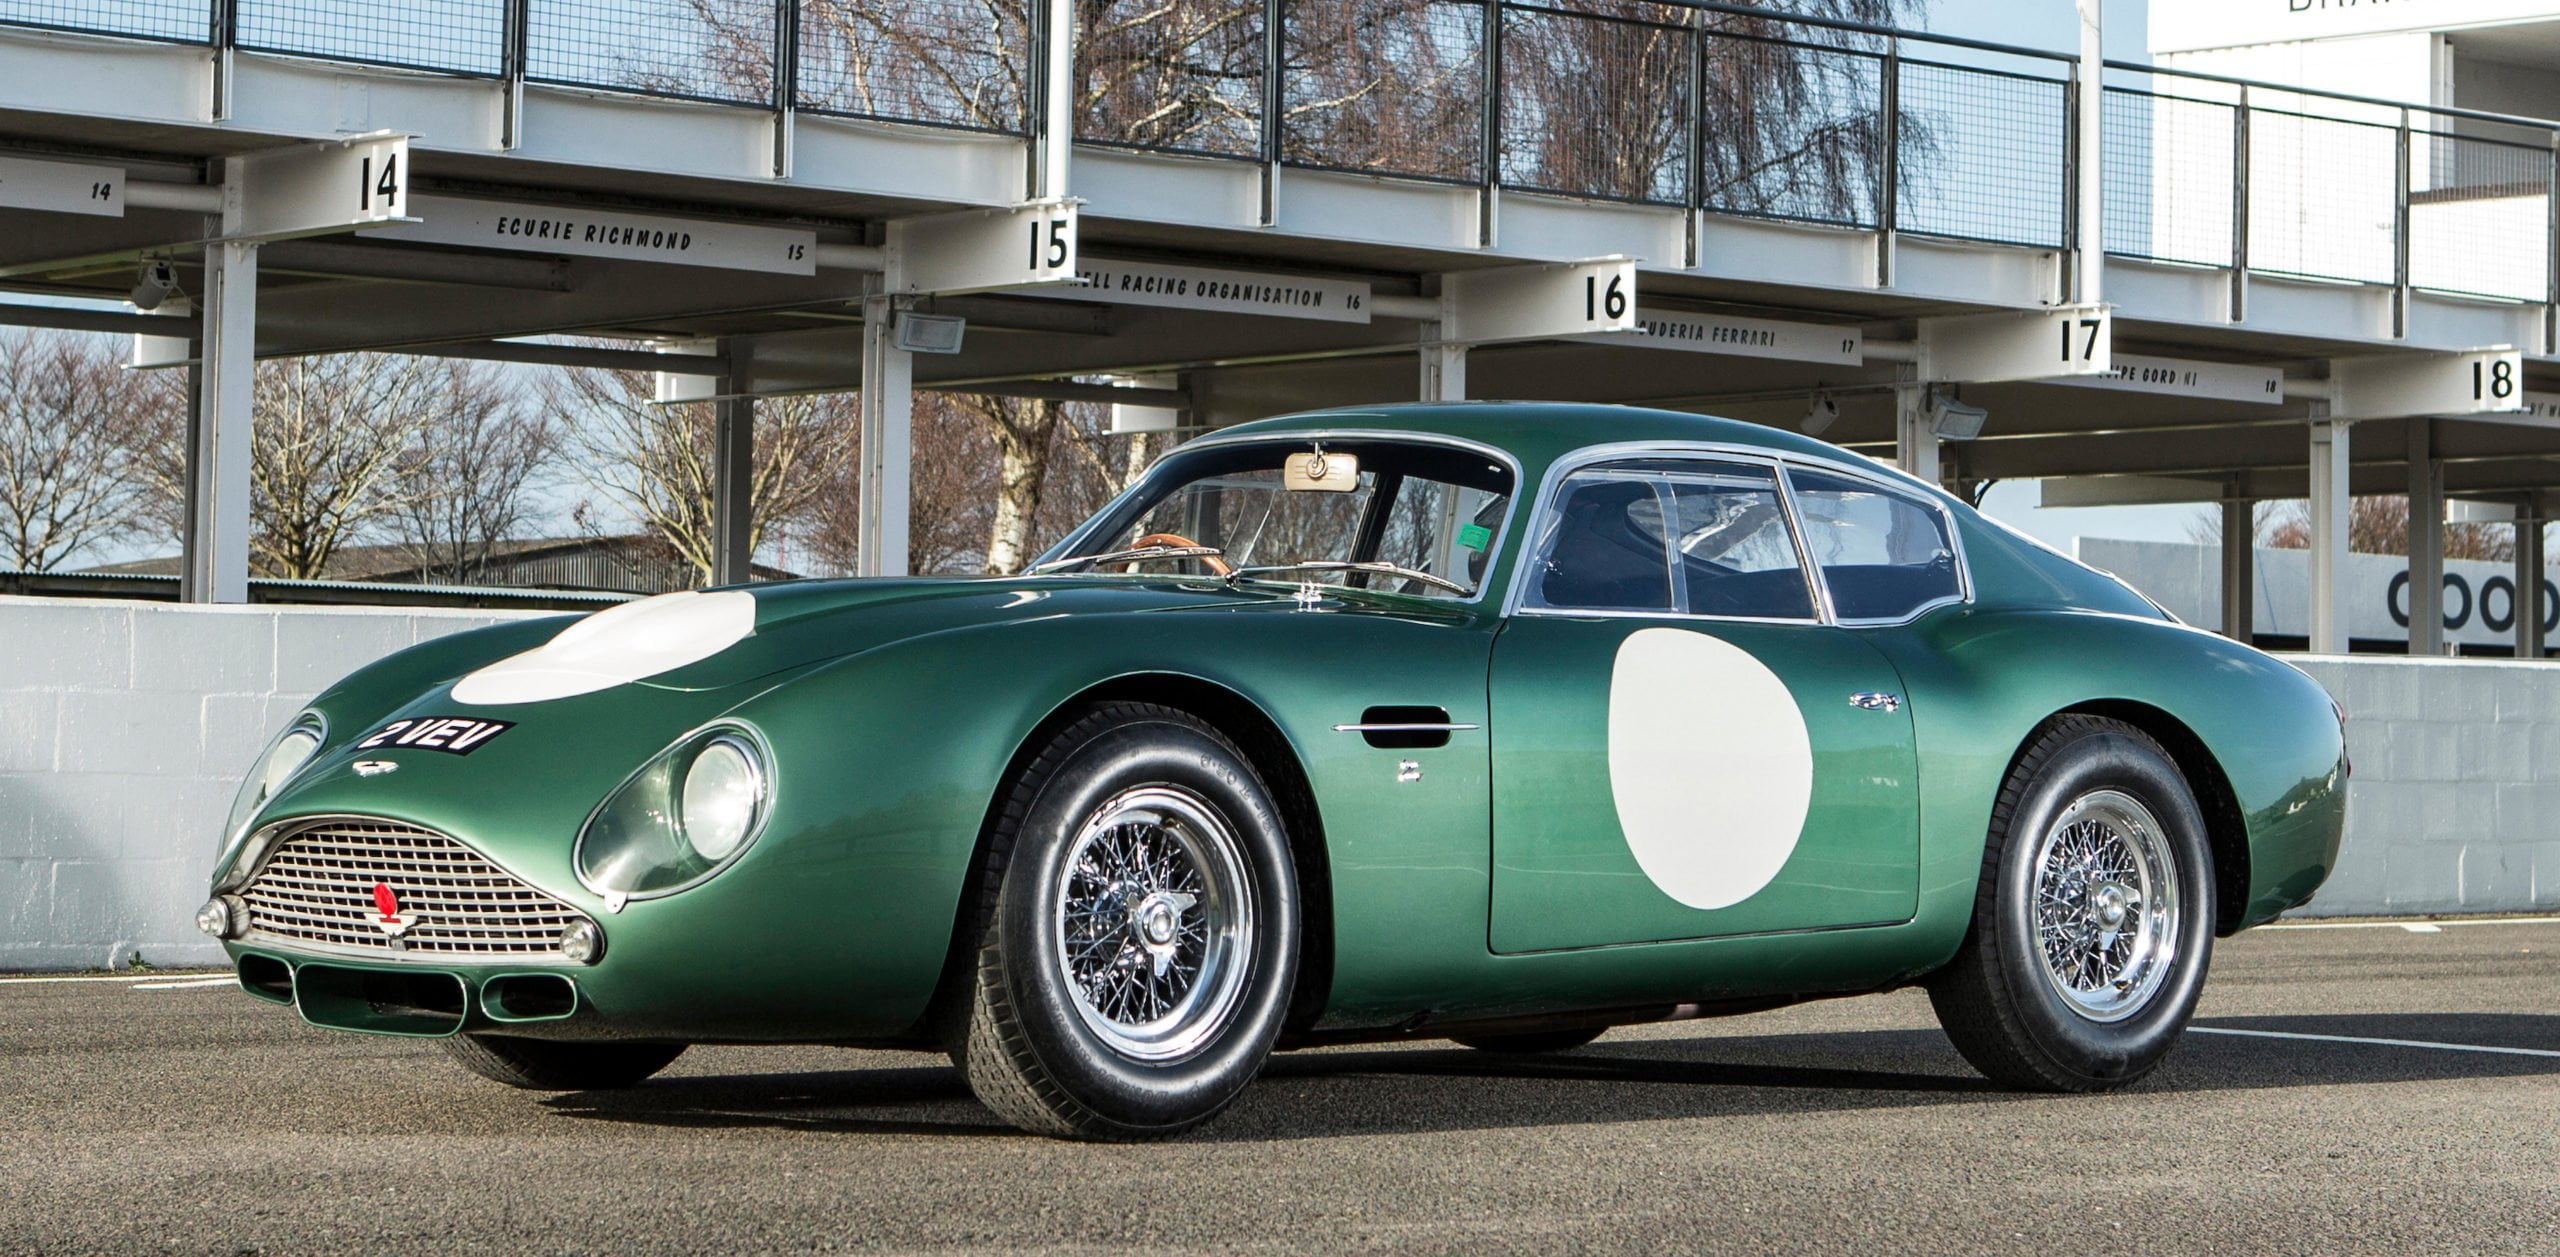 Aston Martin DB4GT Zagato '2 VEV' Exceptional Classic Car with a Storied Racing History Priced at £10,081,500